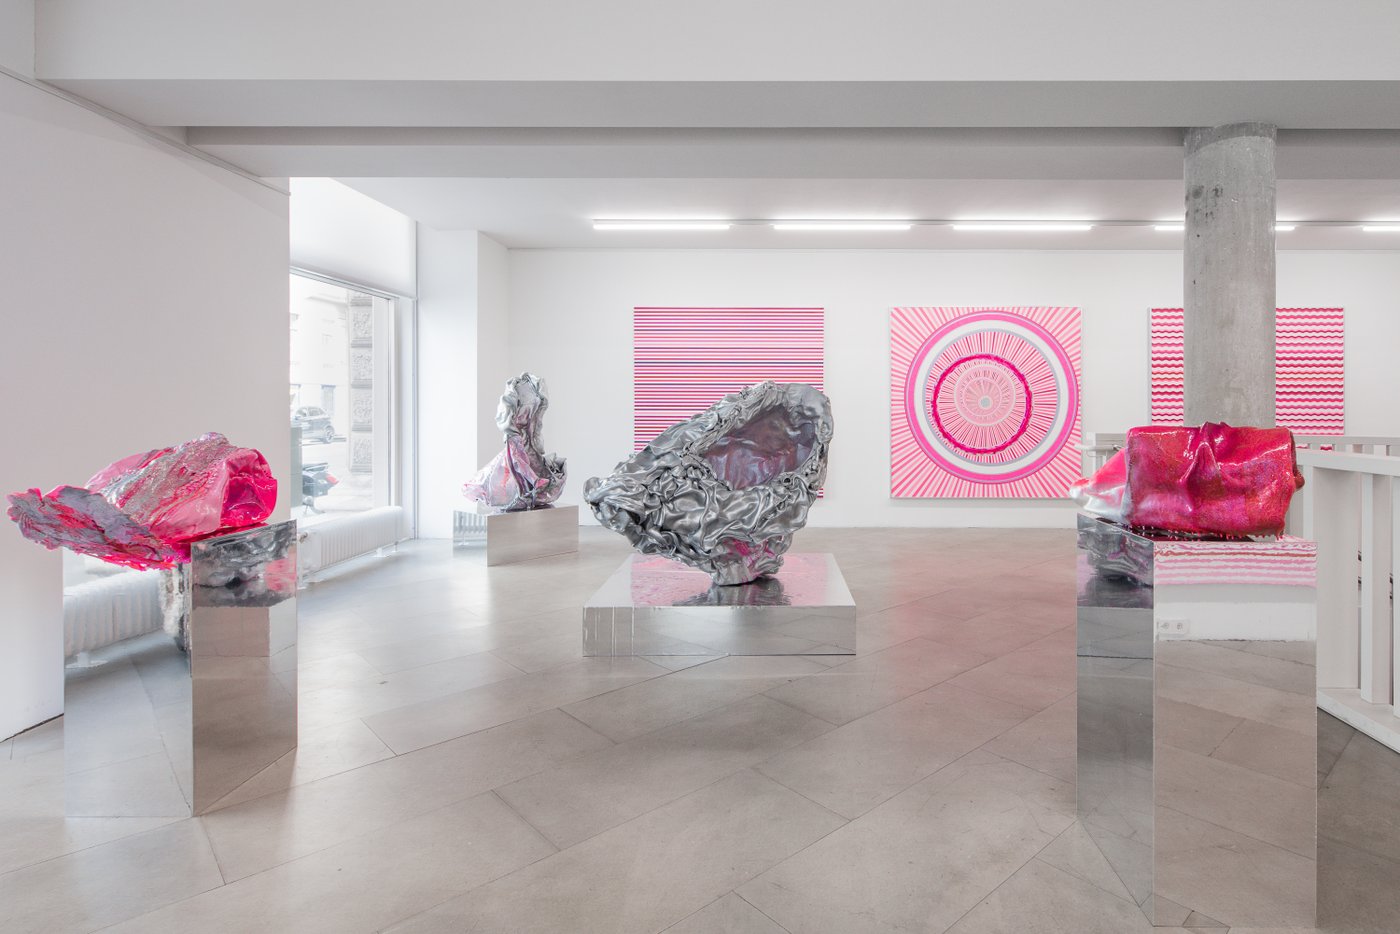 4 silver metallic objects that look like crumpled aluminum foil on silver pedestals, two of them are dipped in pink color, in the background on the wall three large-sized paintings with pink-white lines and circles